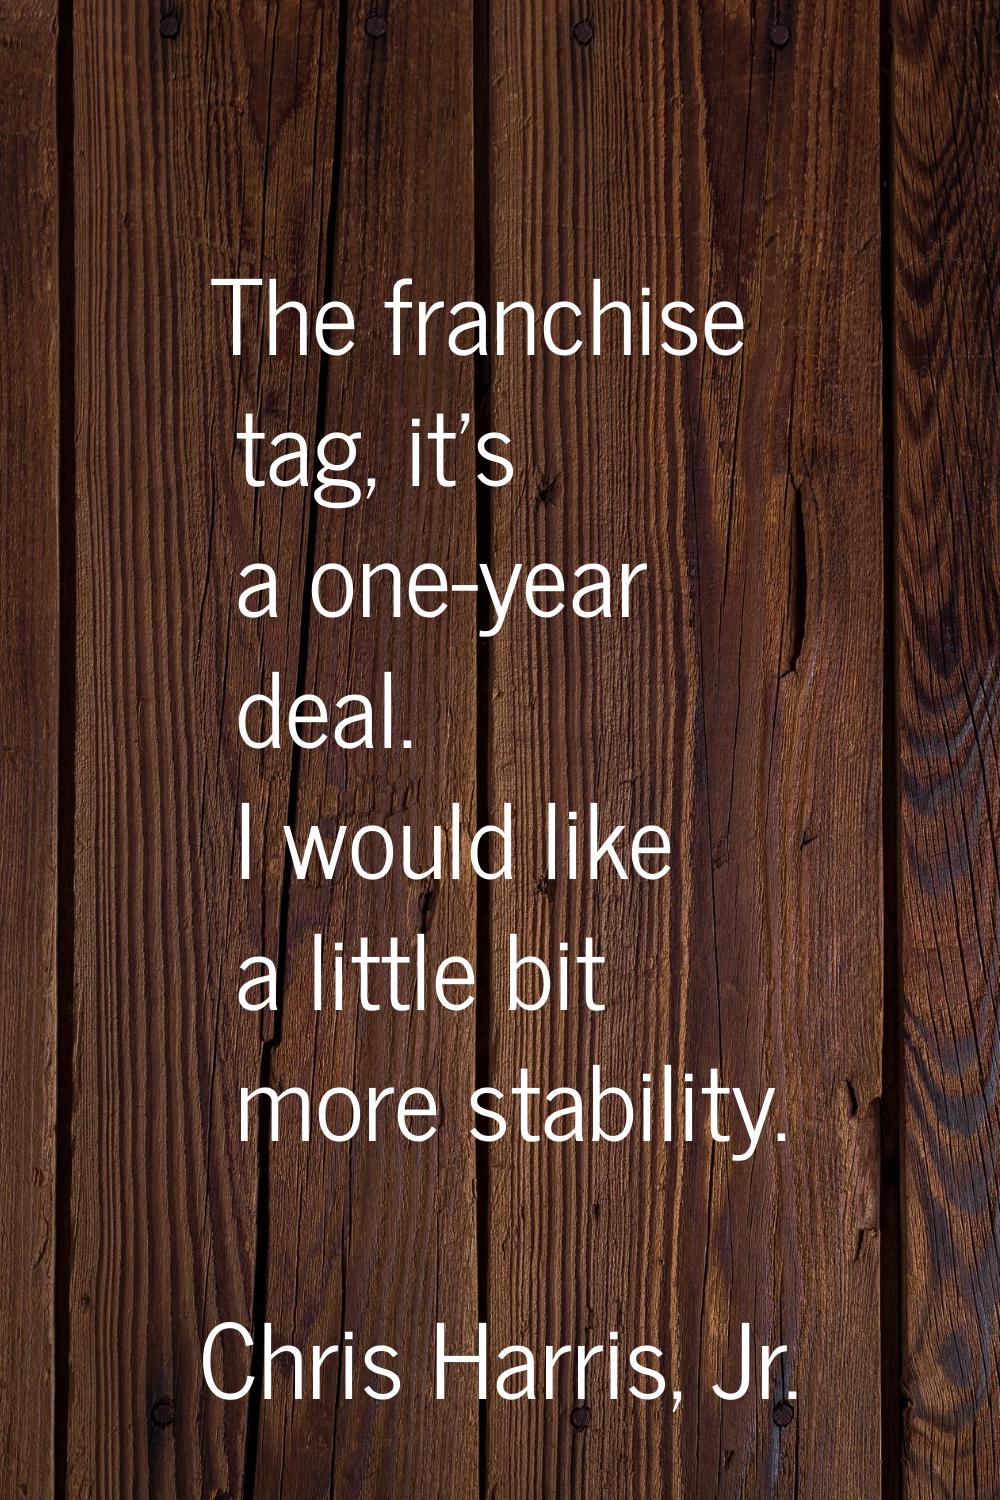 The franchise tag, it's a one-year deal. I would like a little bit more stability.